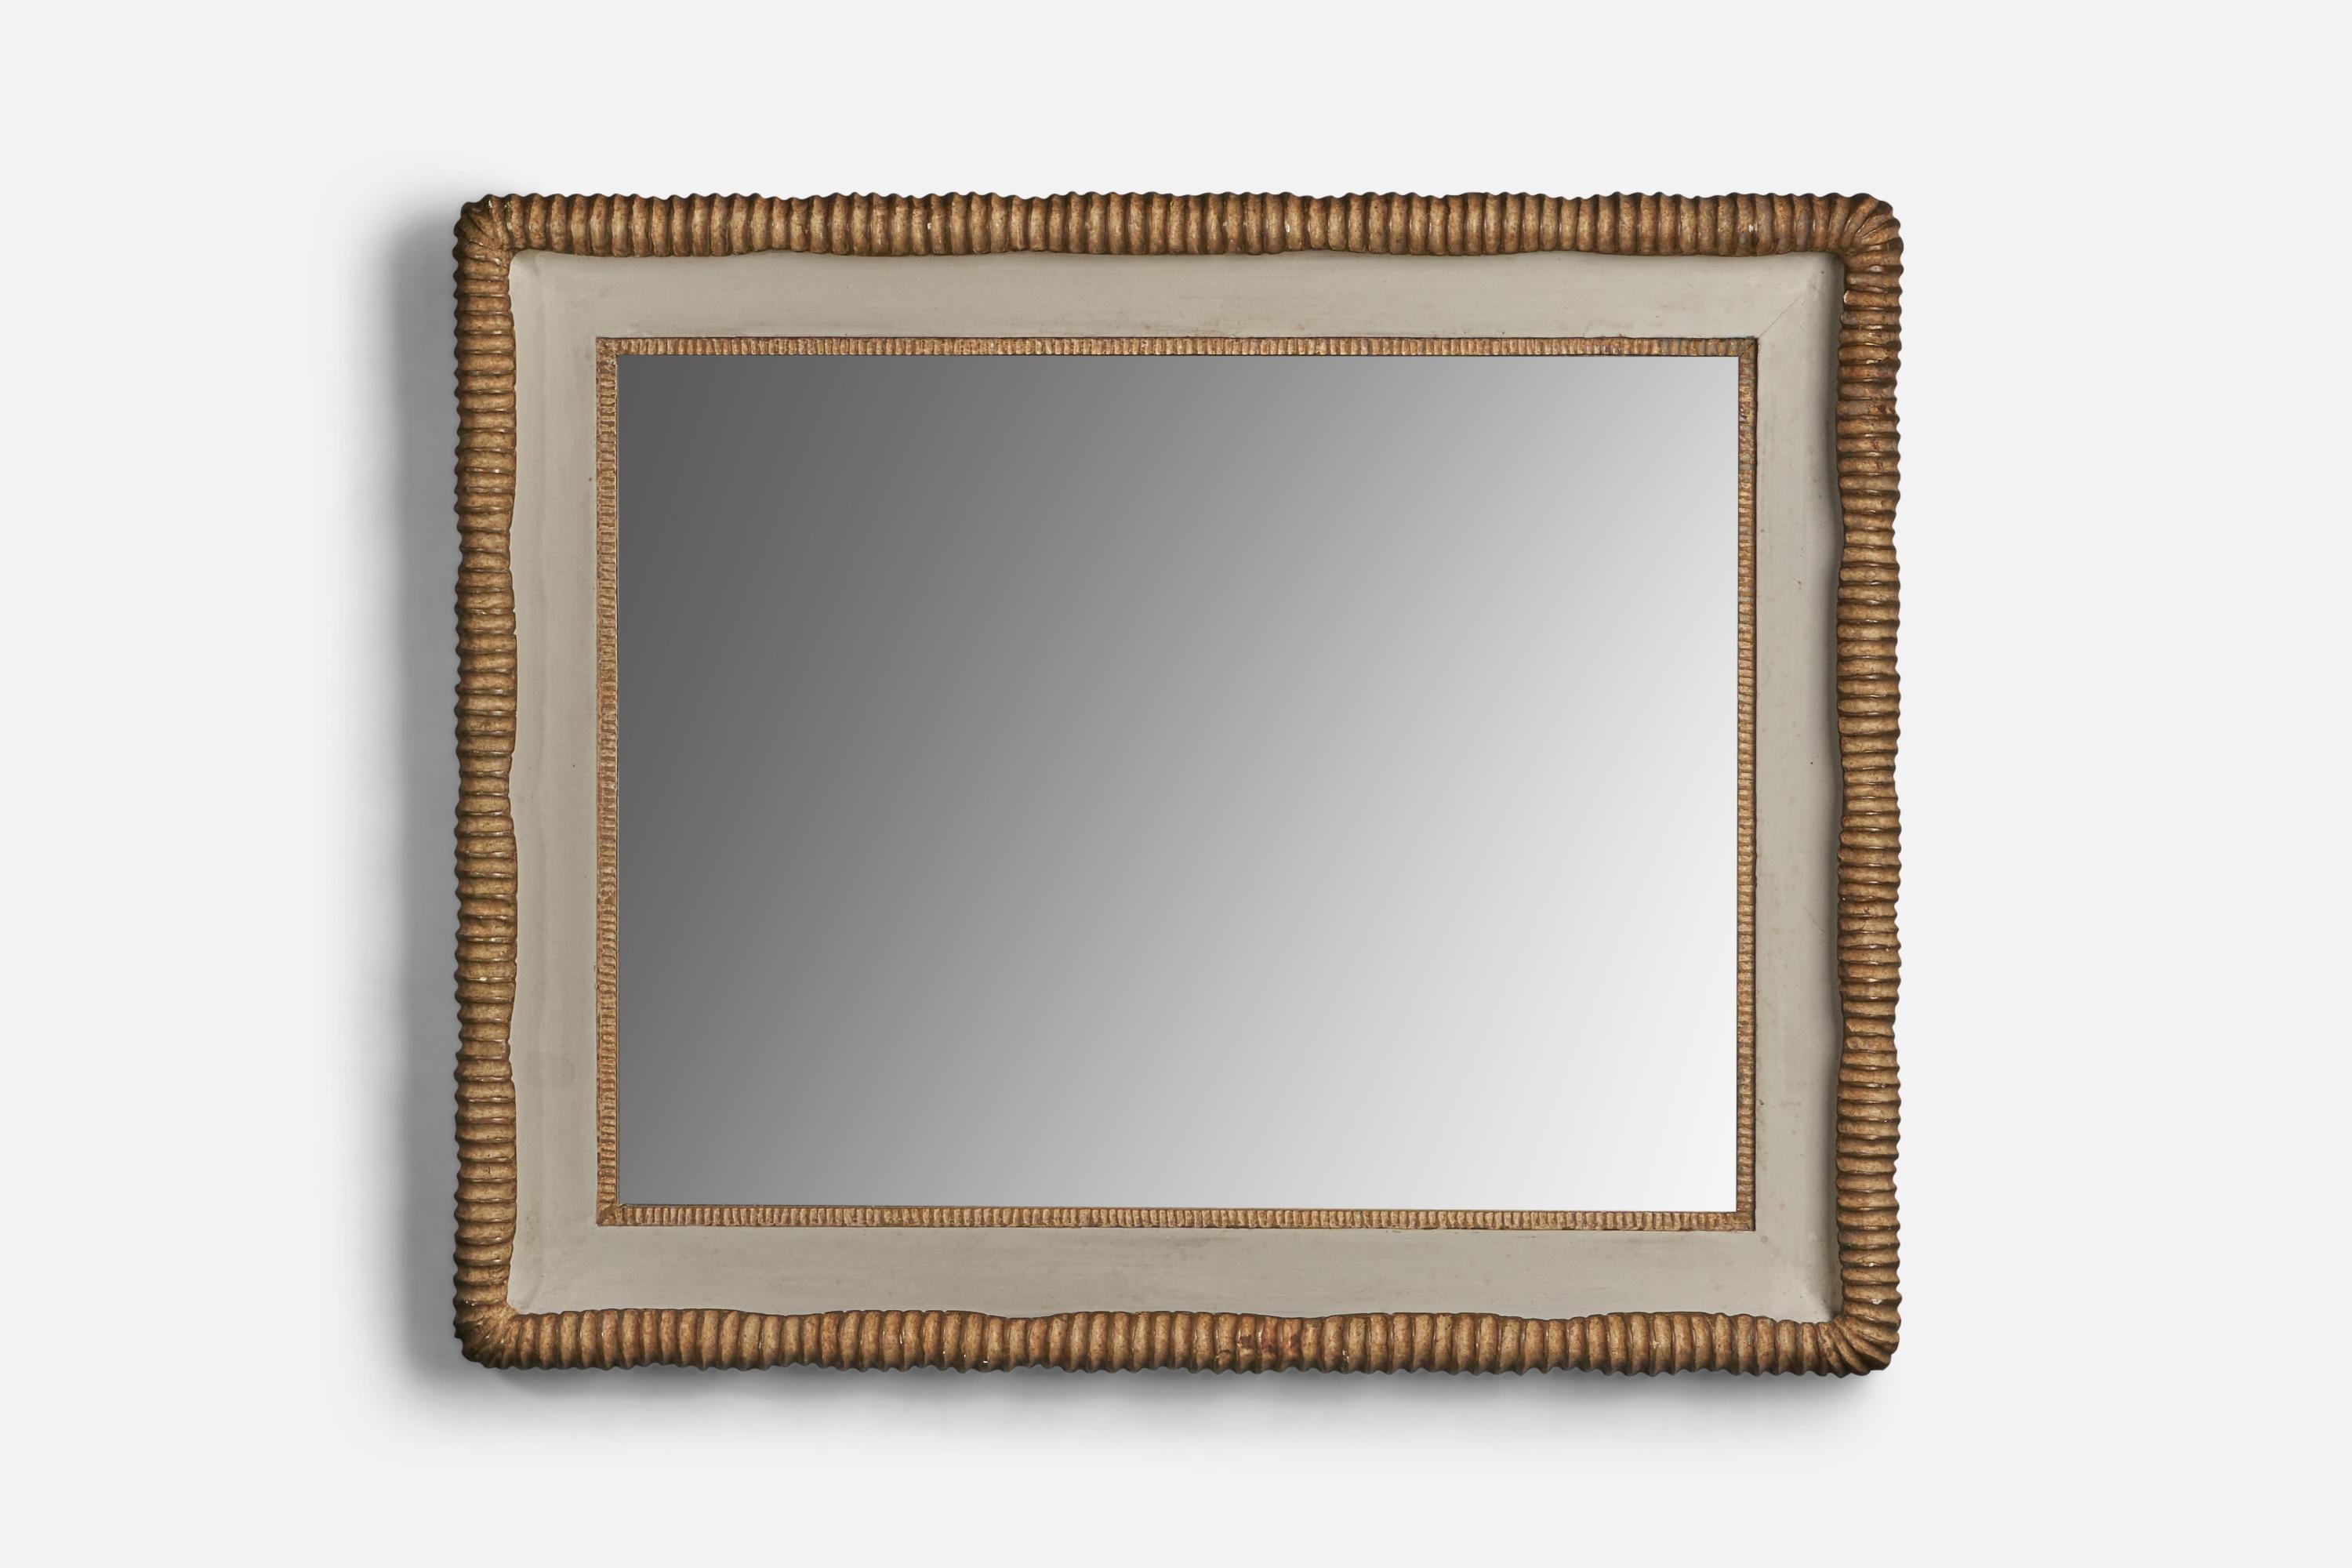 A white and brown-painted wood wall mirror designed and produced in Italy, c. 1940s.